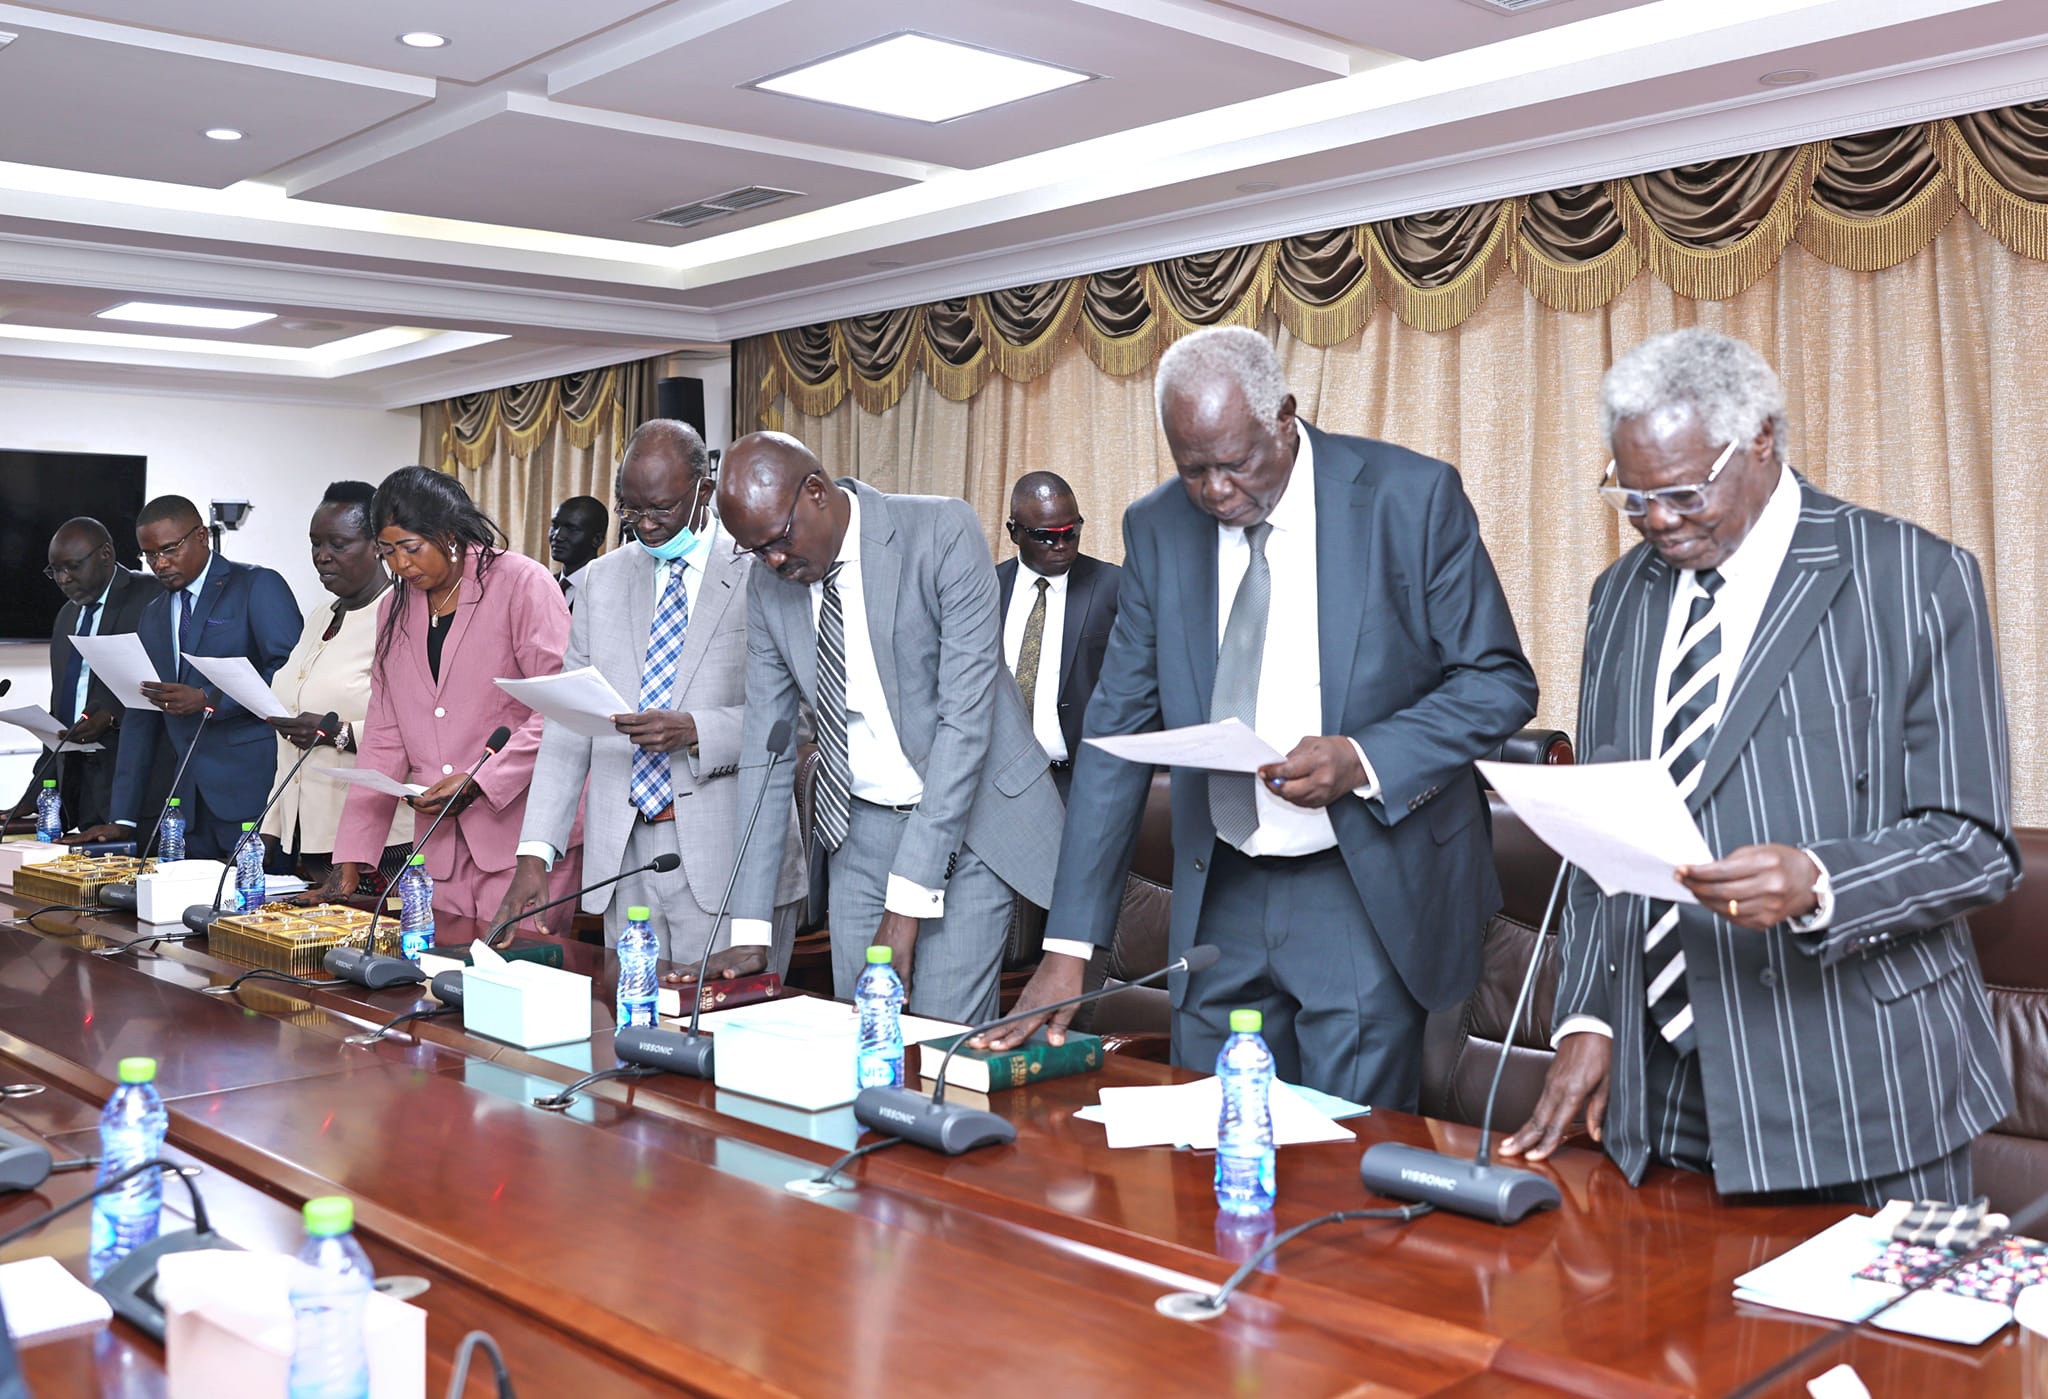 NEC officials take oath of office as country heads to polls